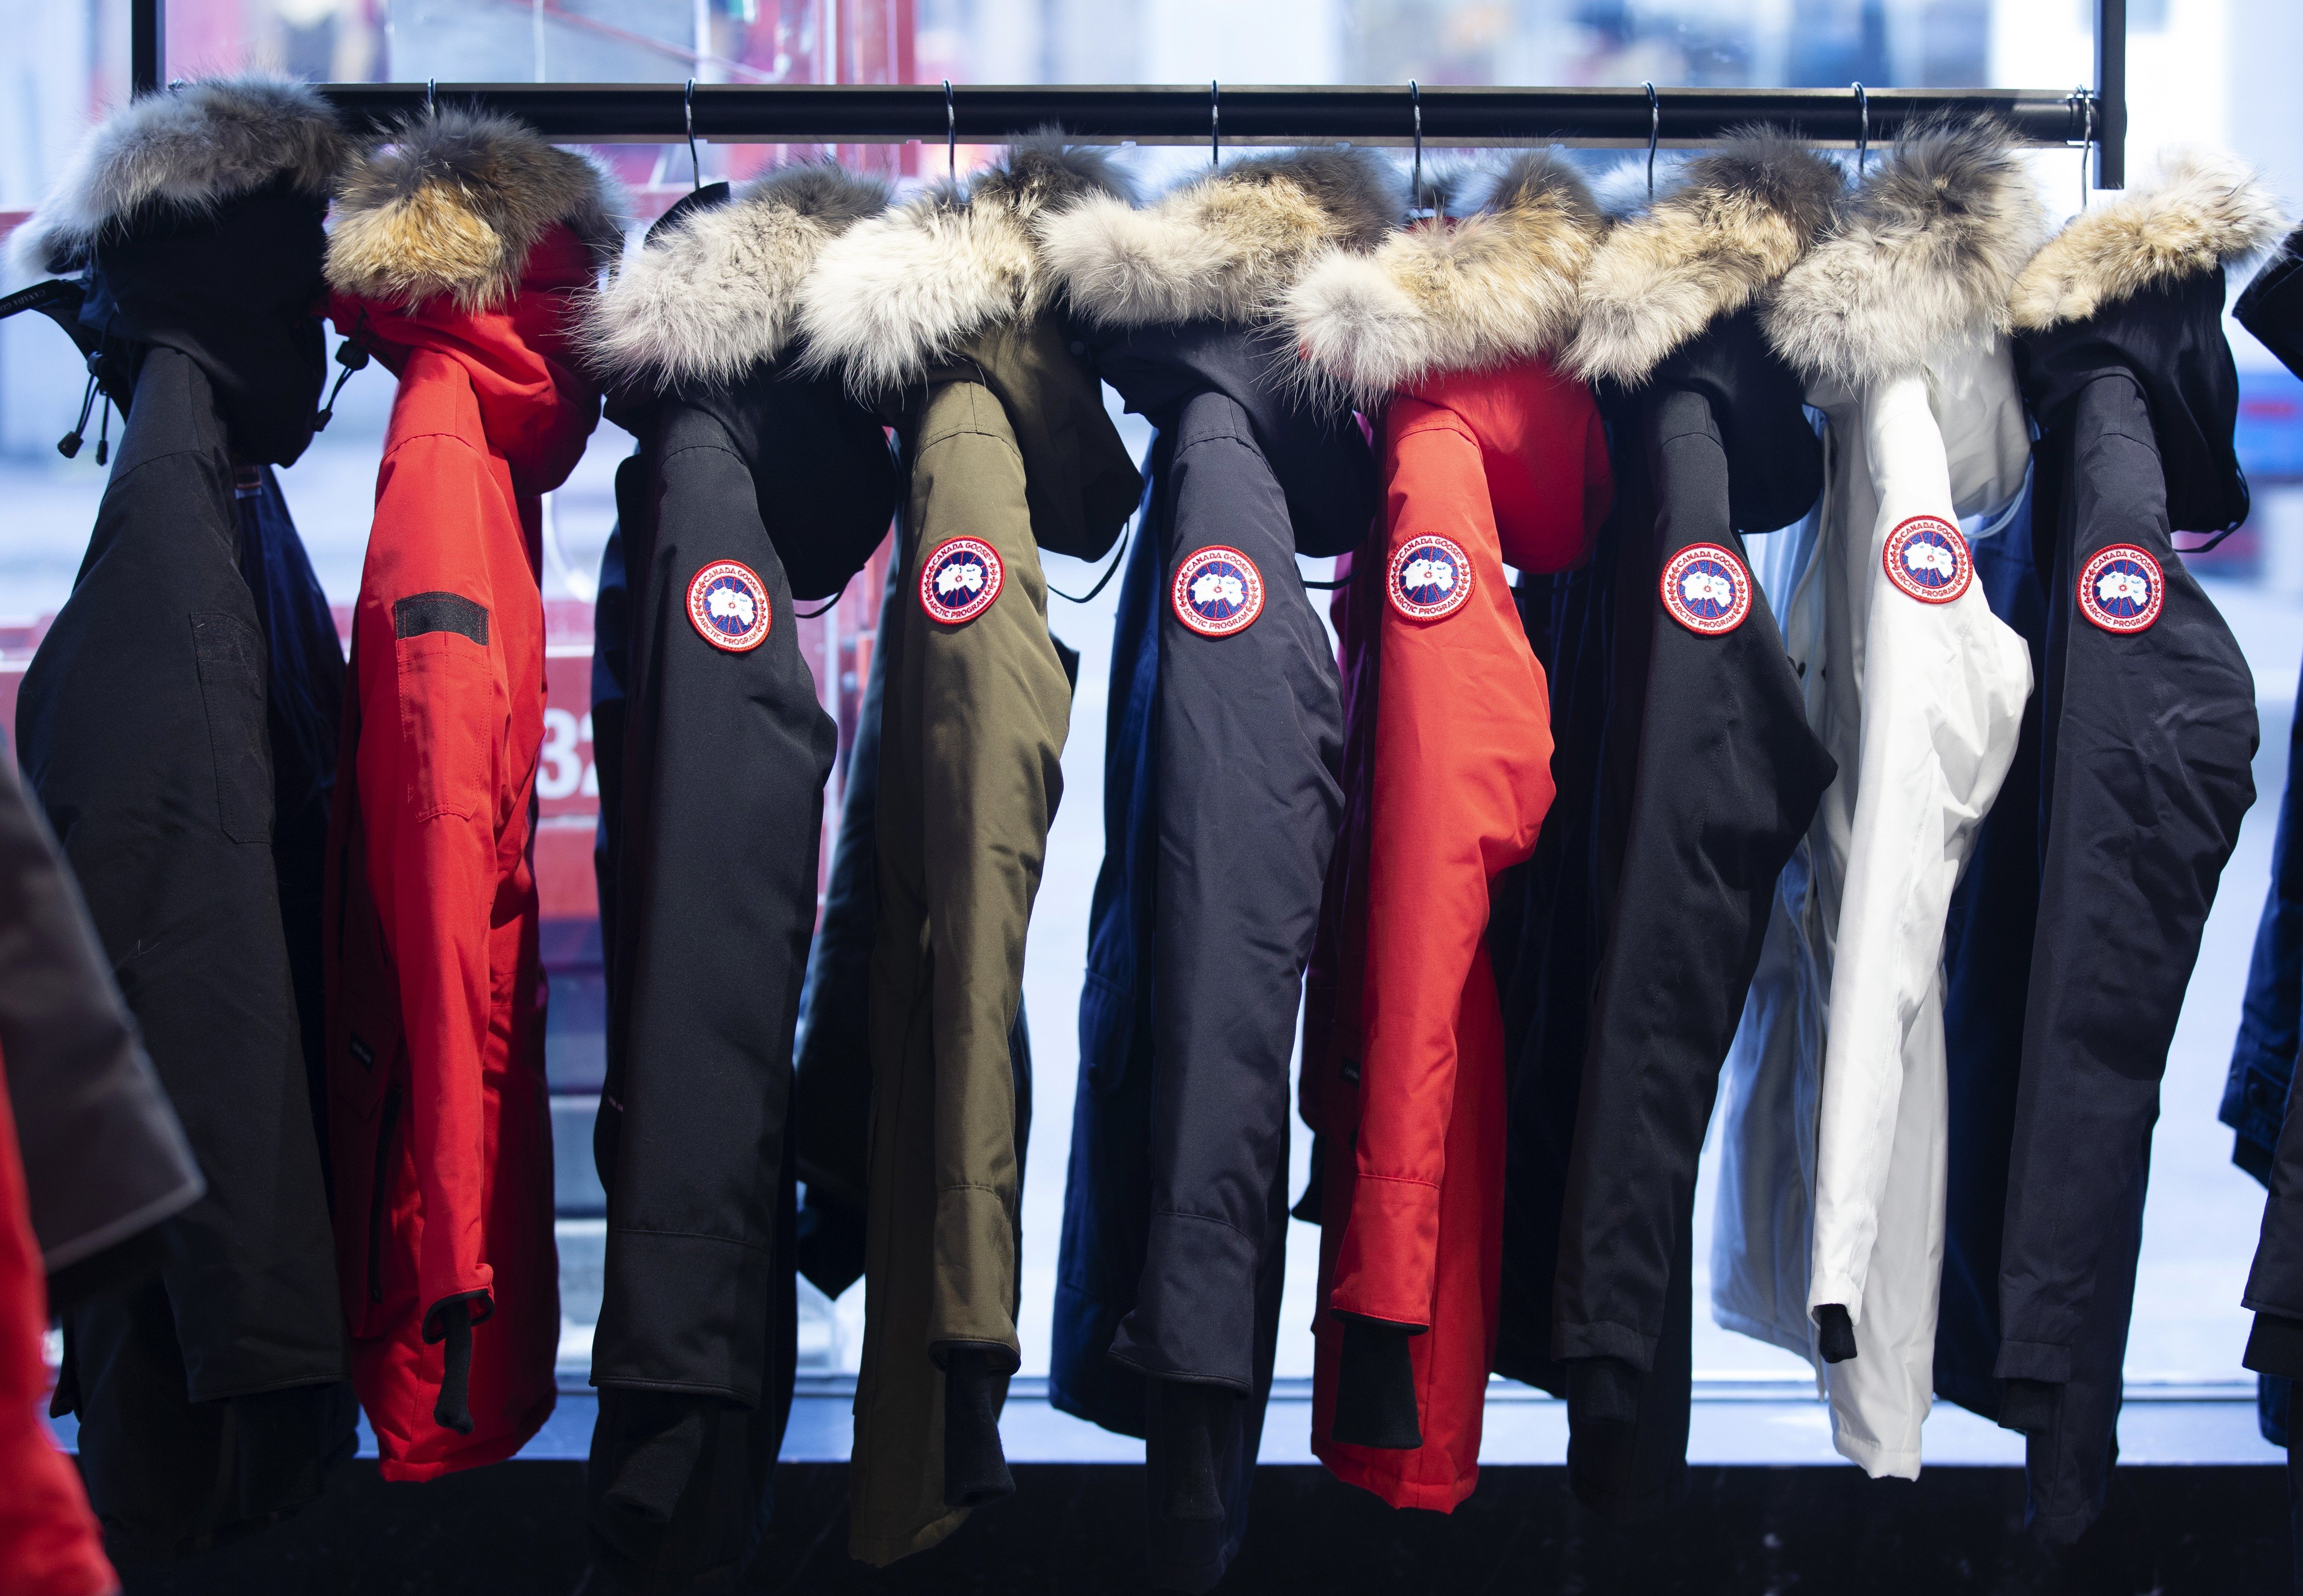 Parkas on display at a Canada Goose store. Photo: Bloomberg